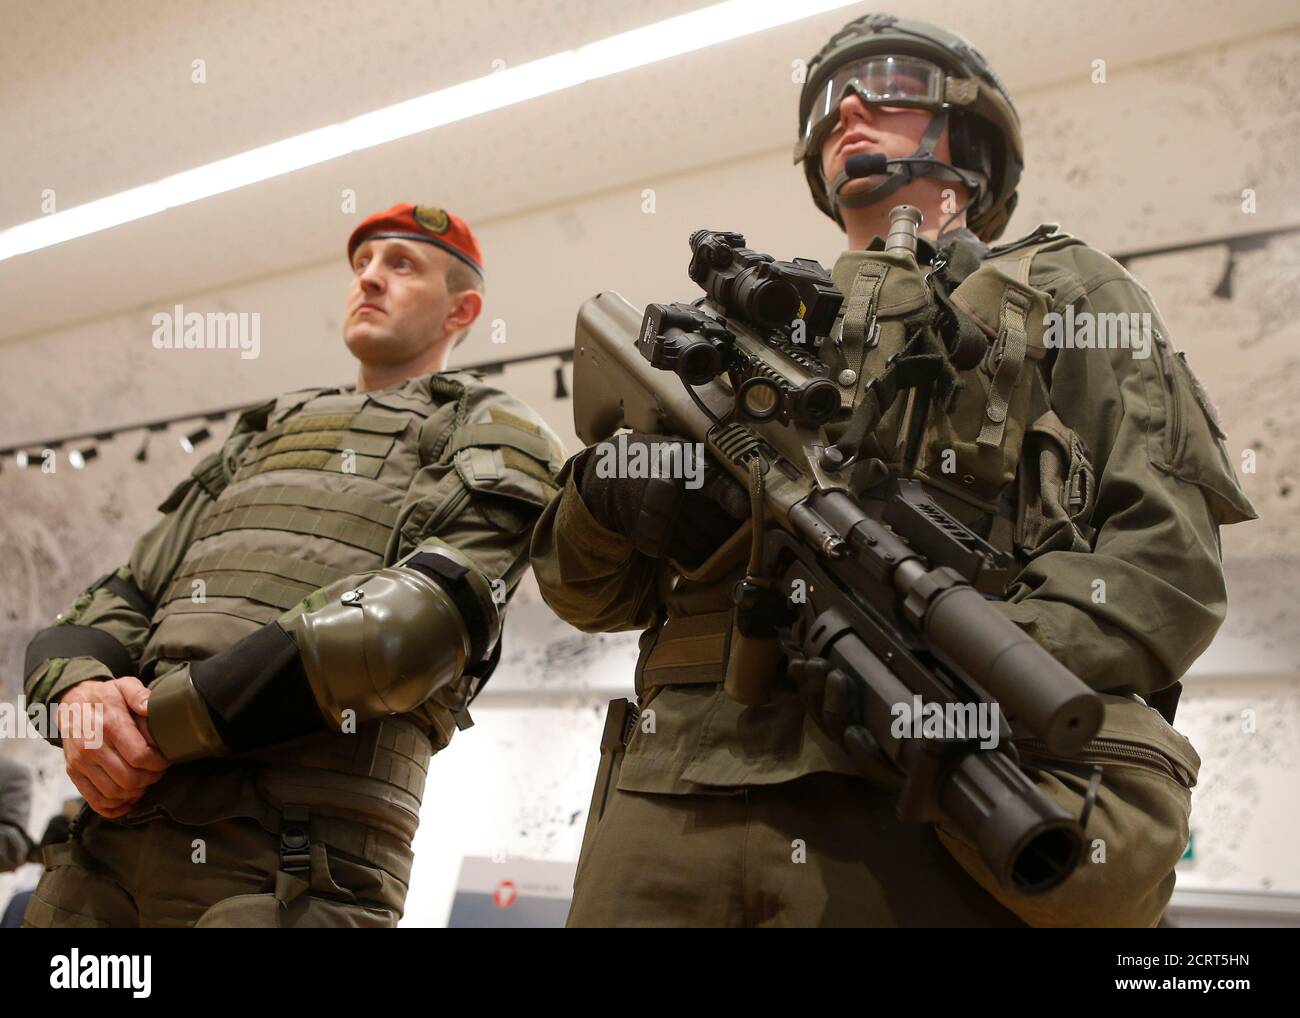 An Austrian army soldier poses with a Steyr AUG A2 Commando assault rifle  during a presentation